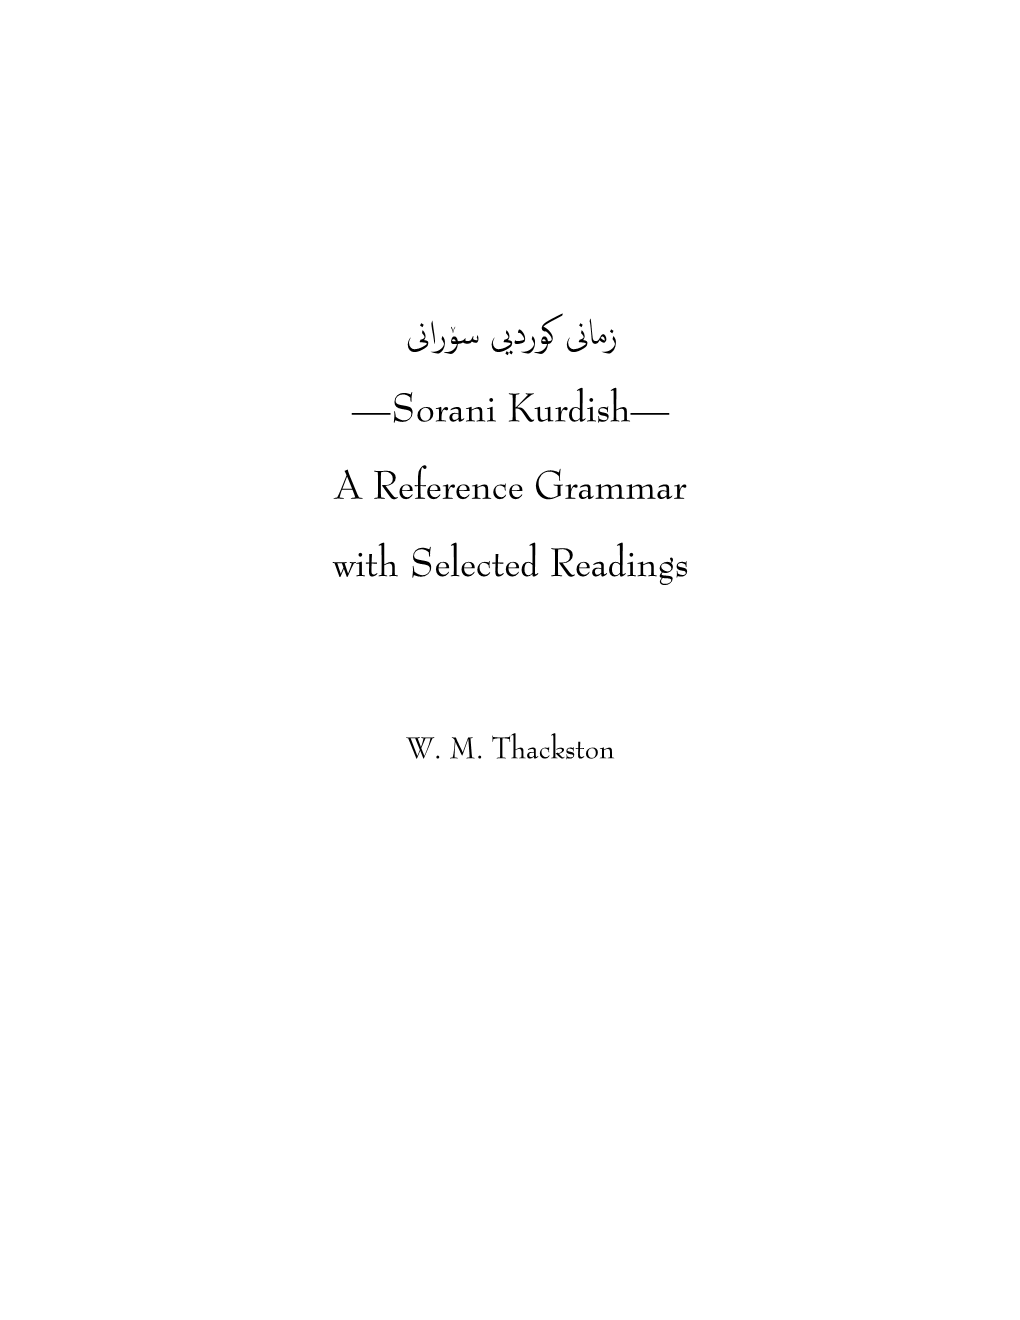 Sorani Kurdish— a Reference Grammar with Selected Readings